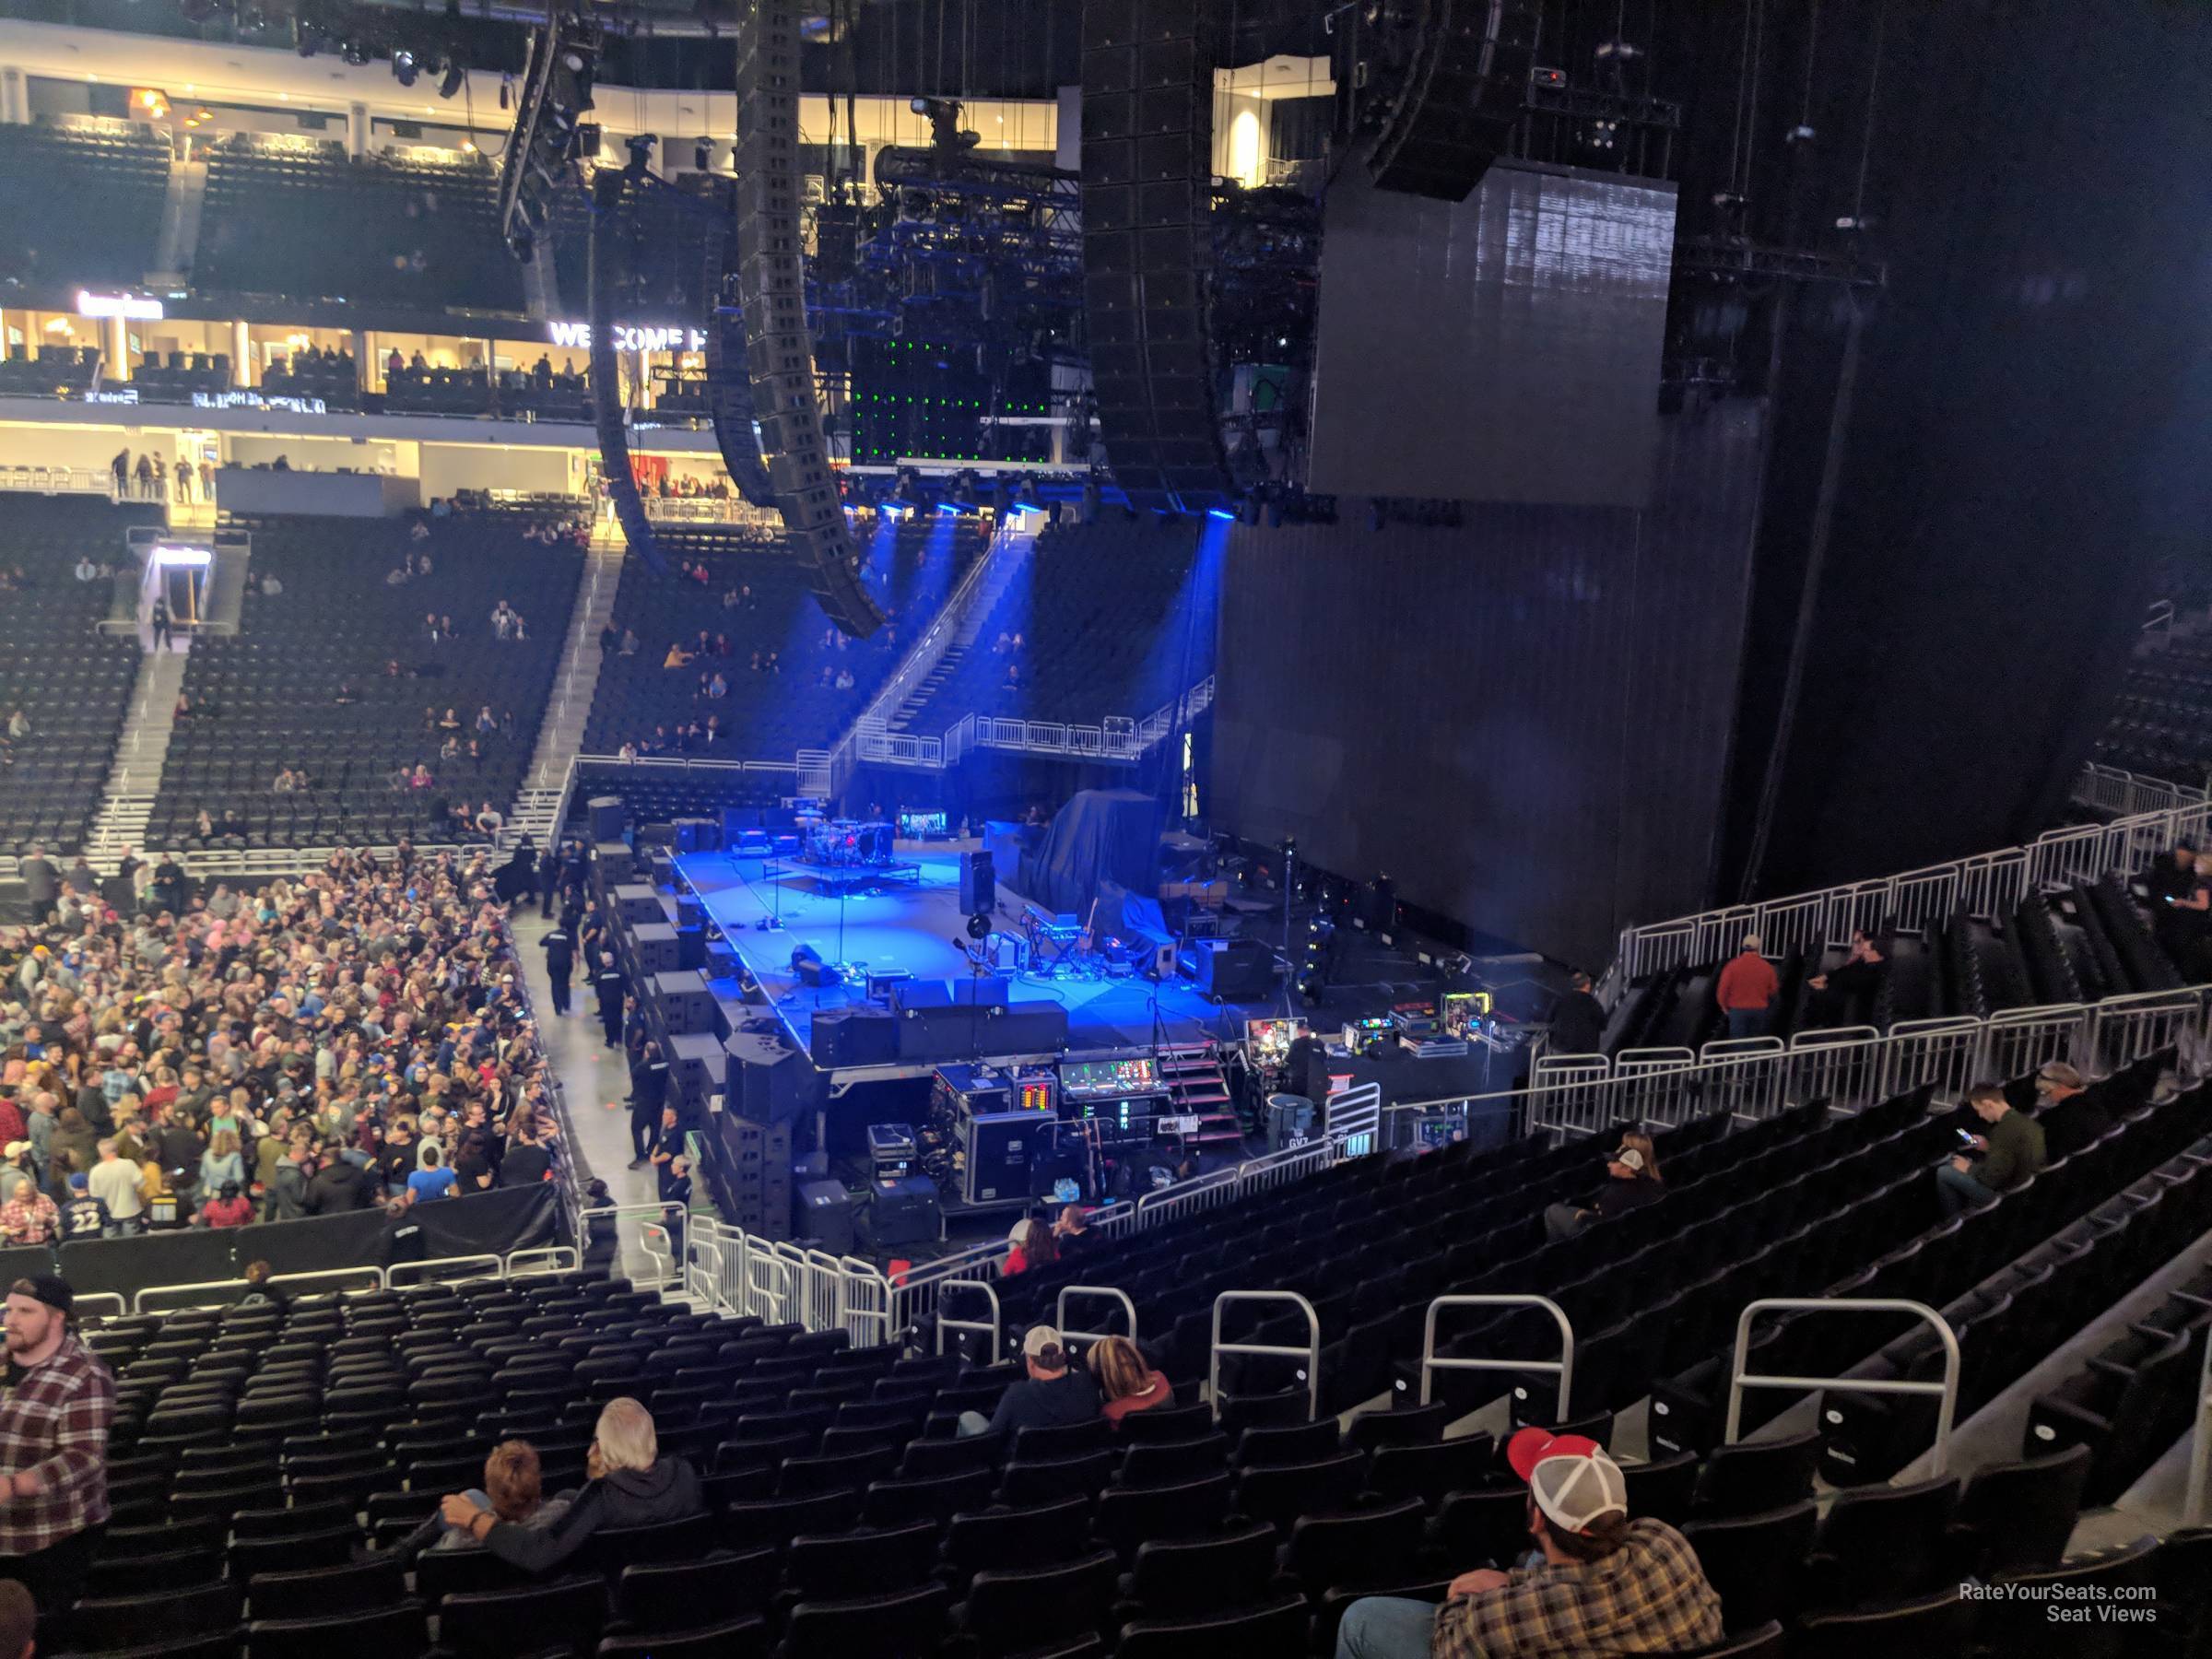 Section 116 at Fiserv Forum for Concerts